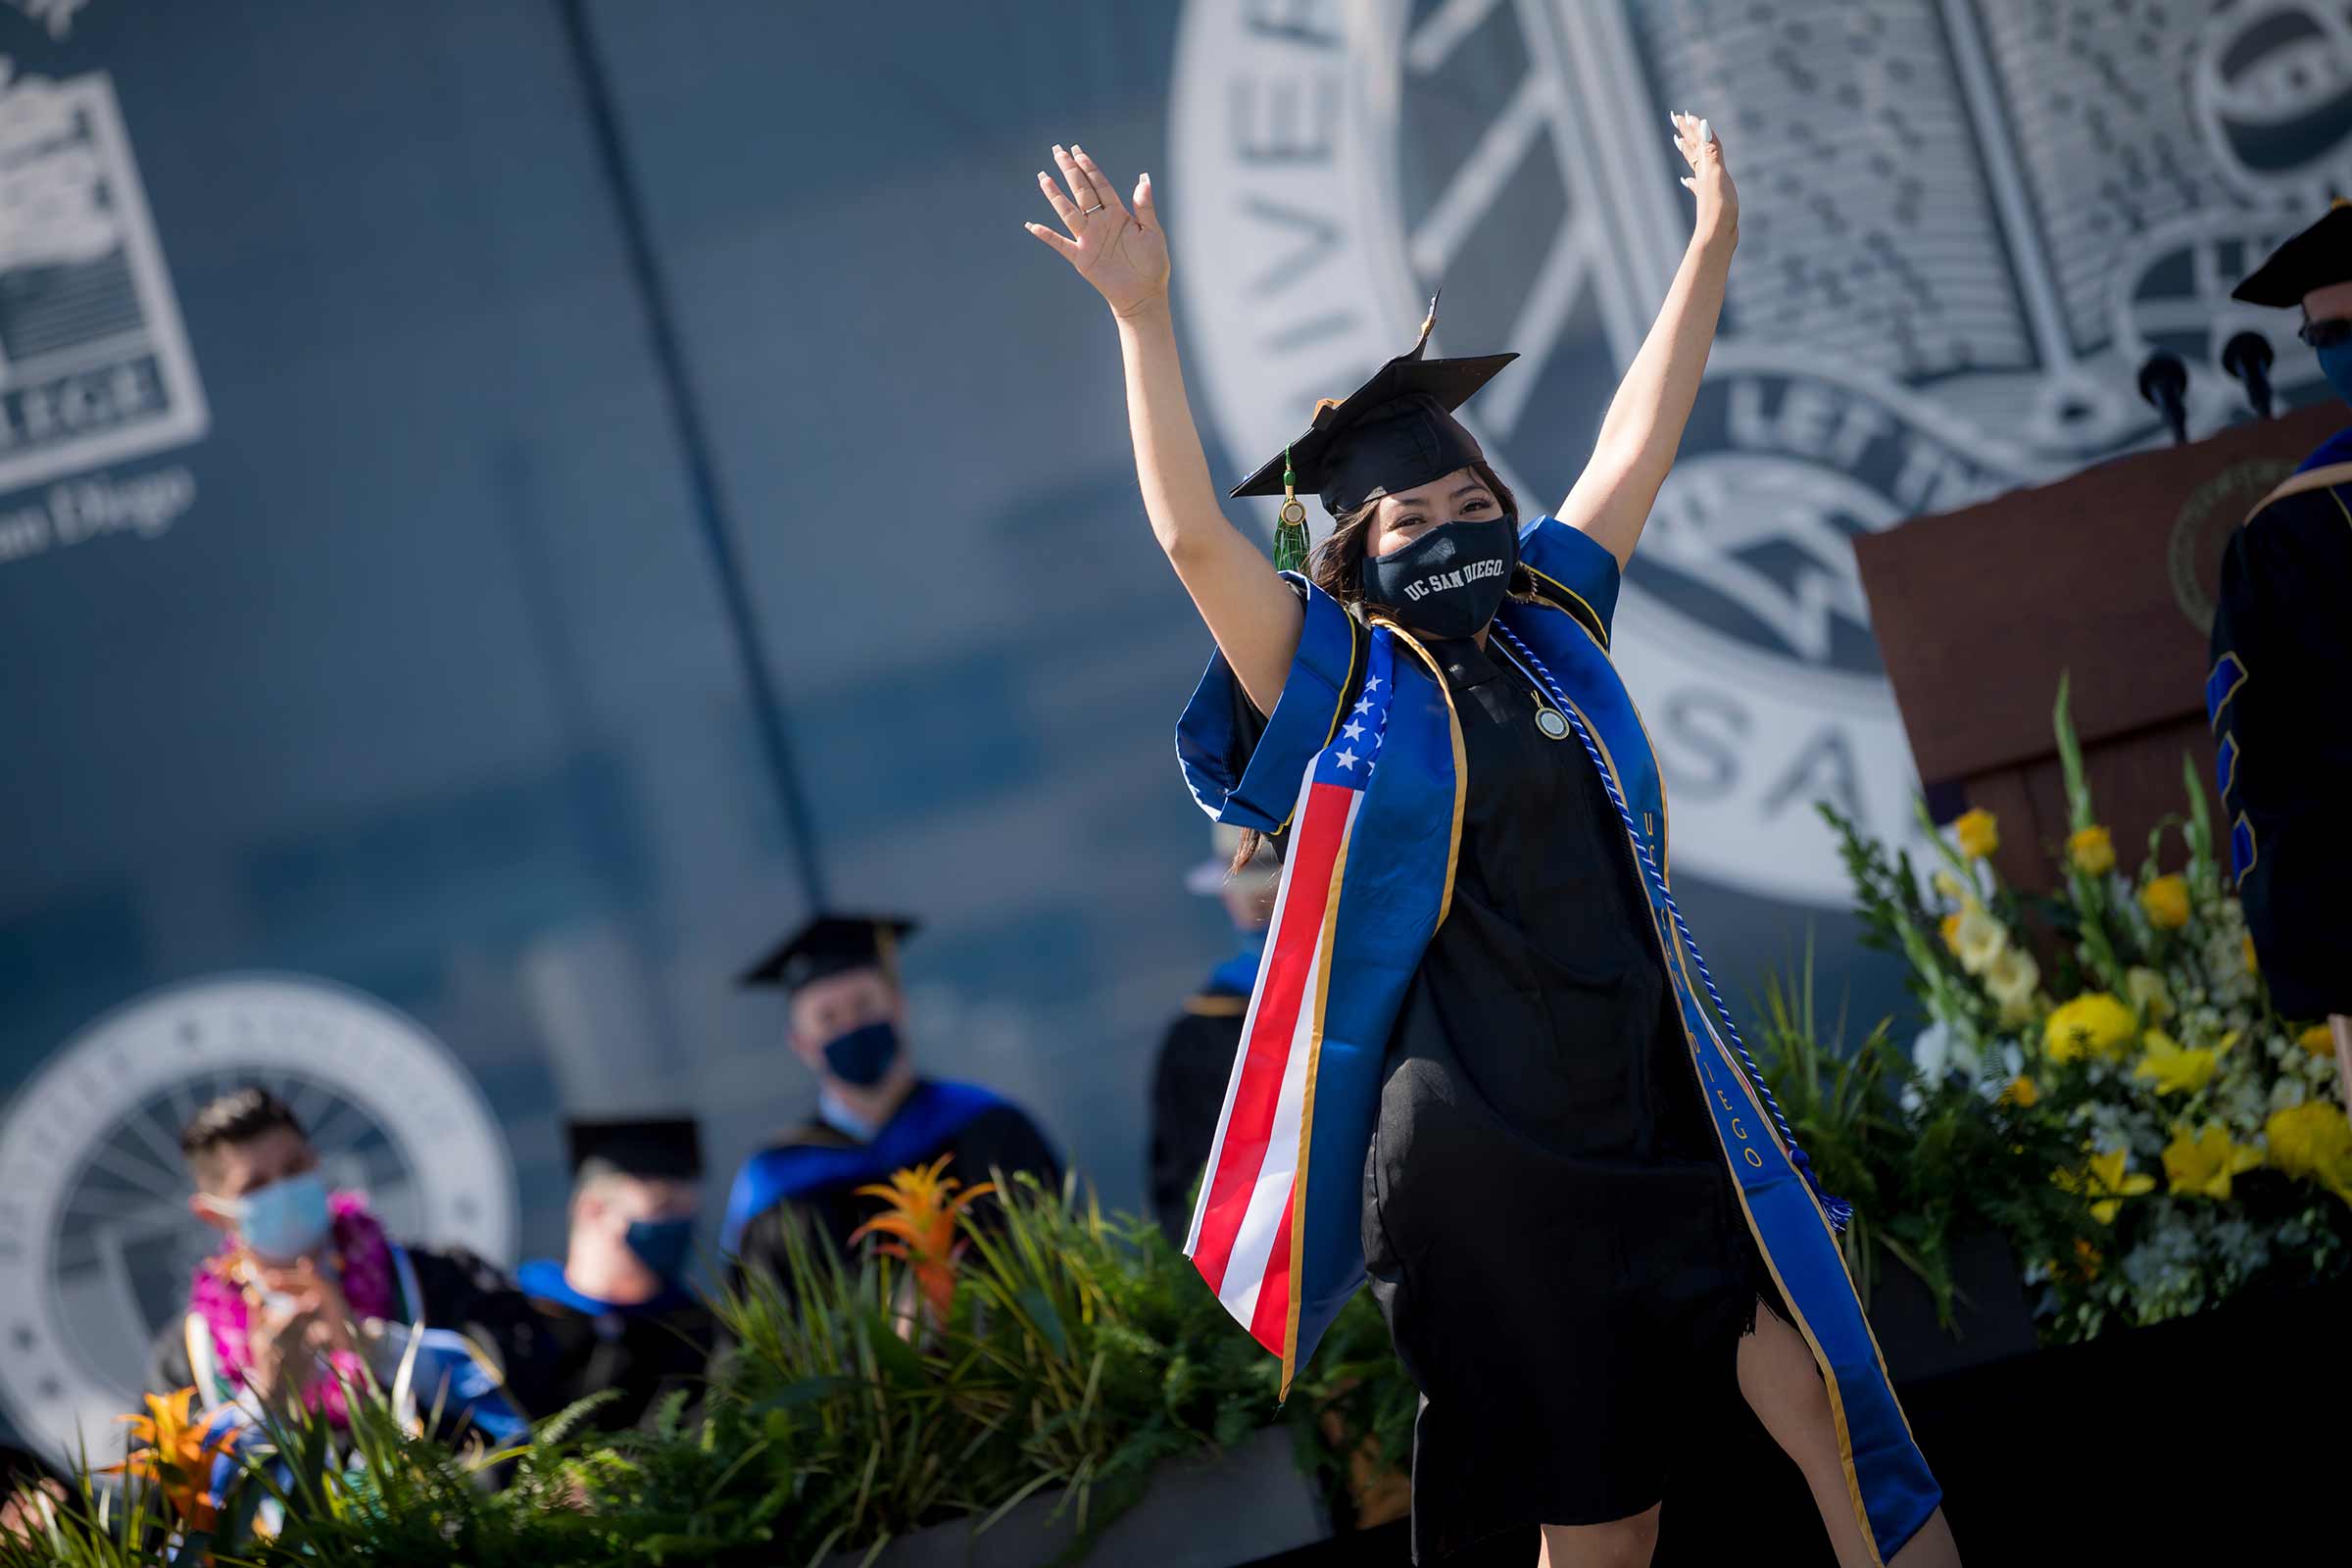 UC San Diego student raises her arms in celebration as she crosses the stage.